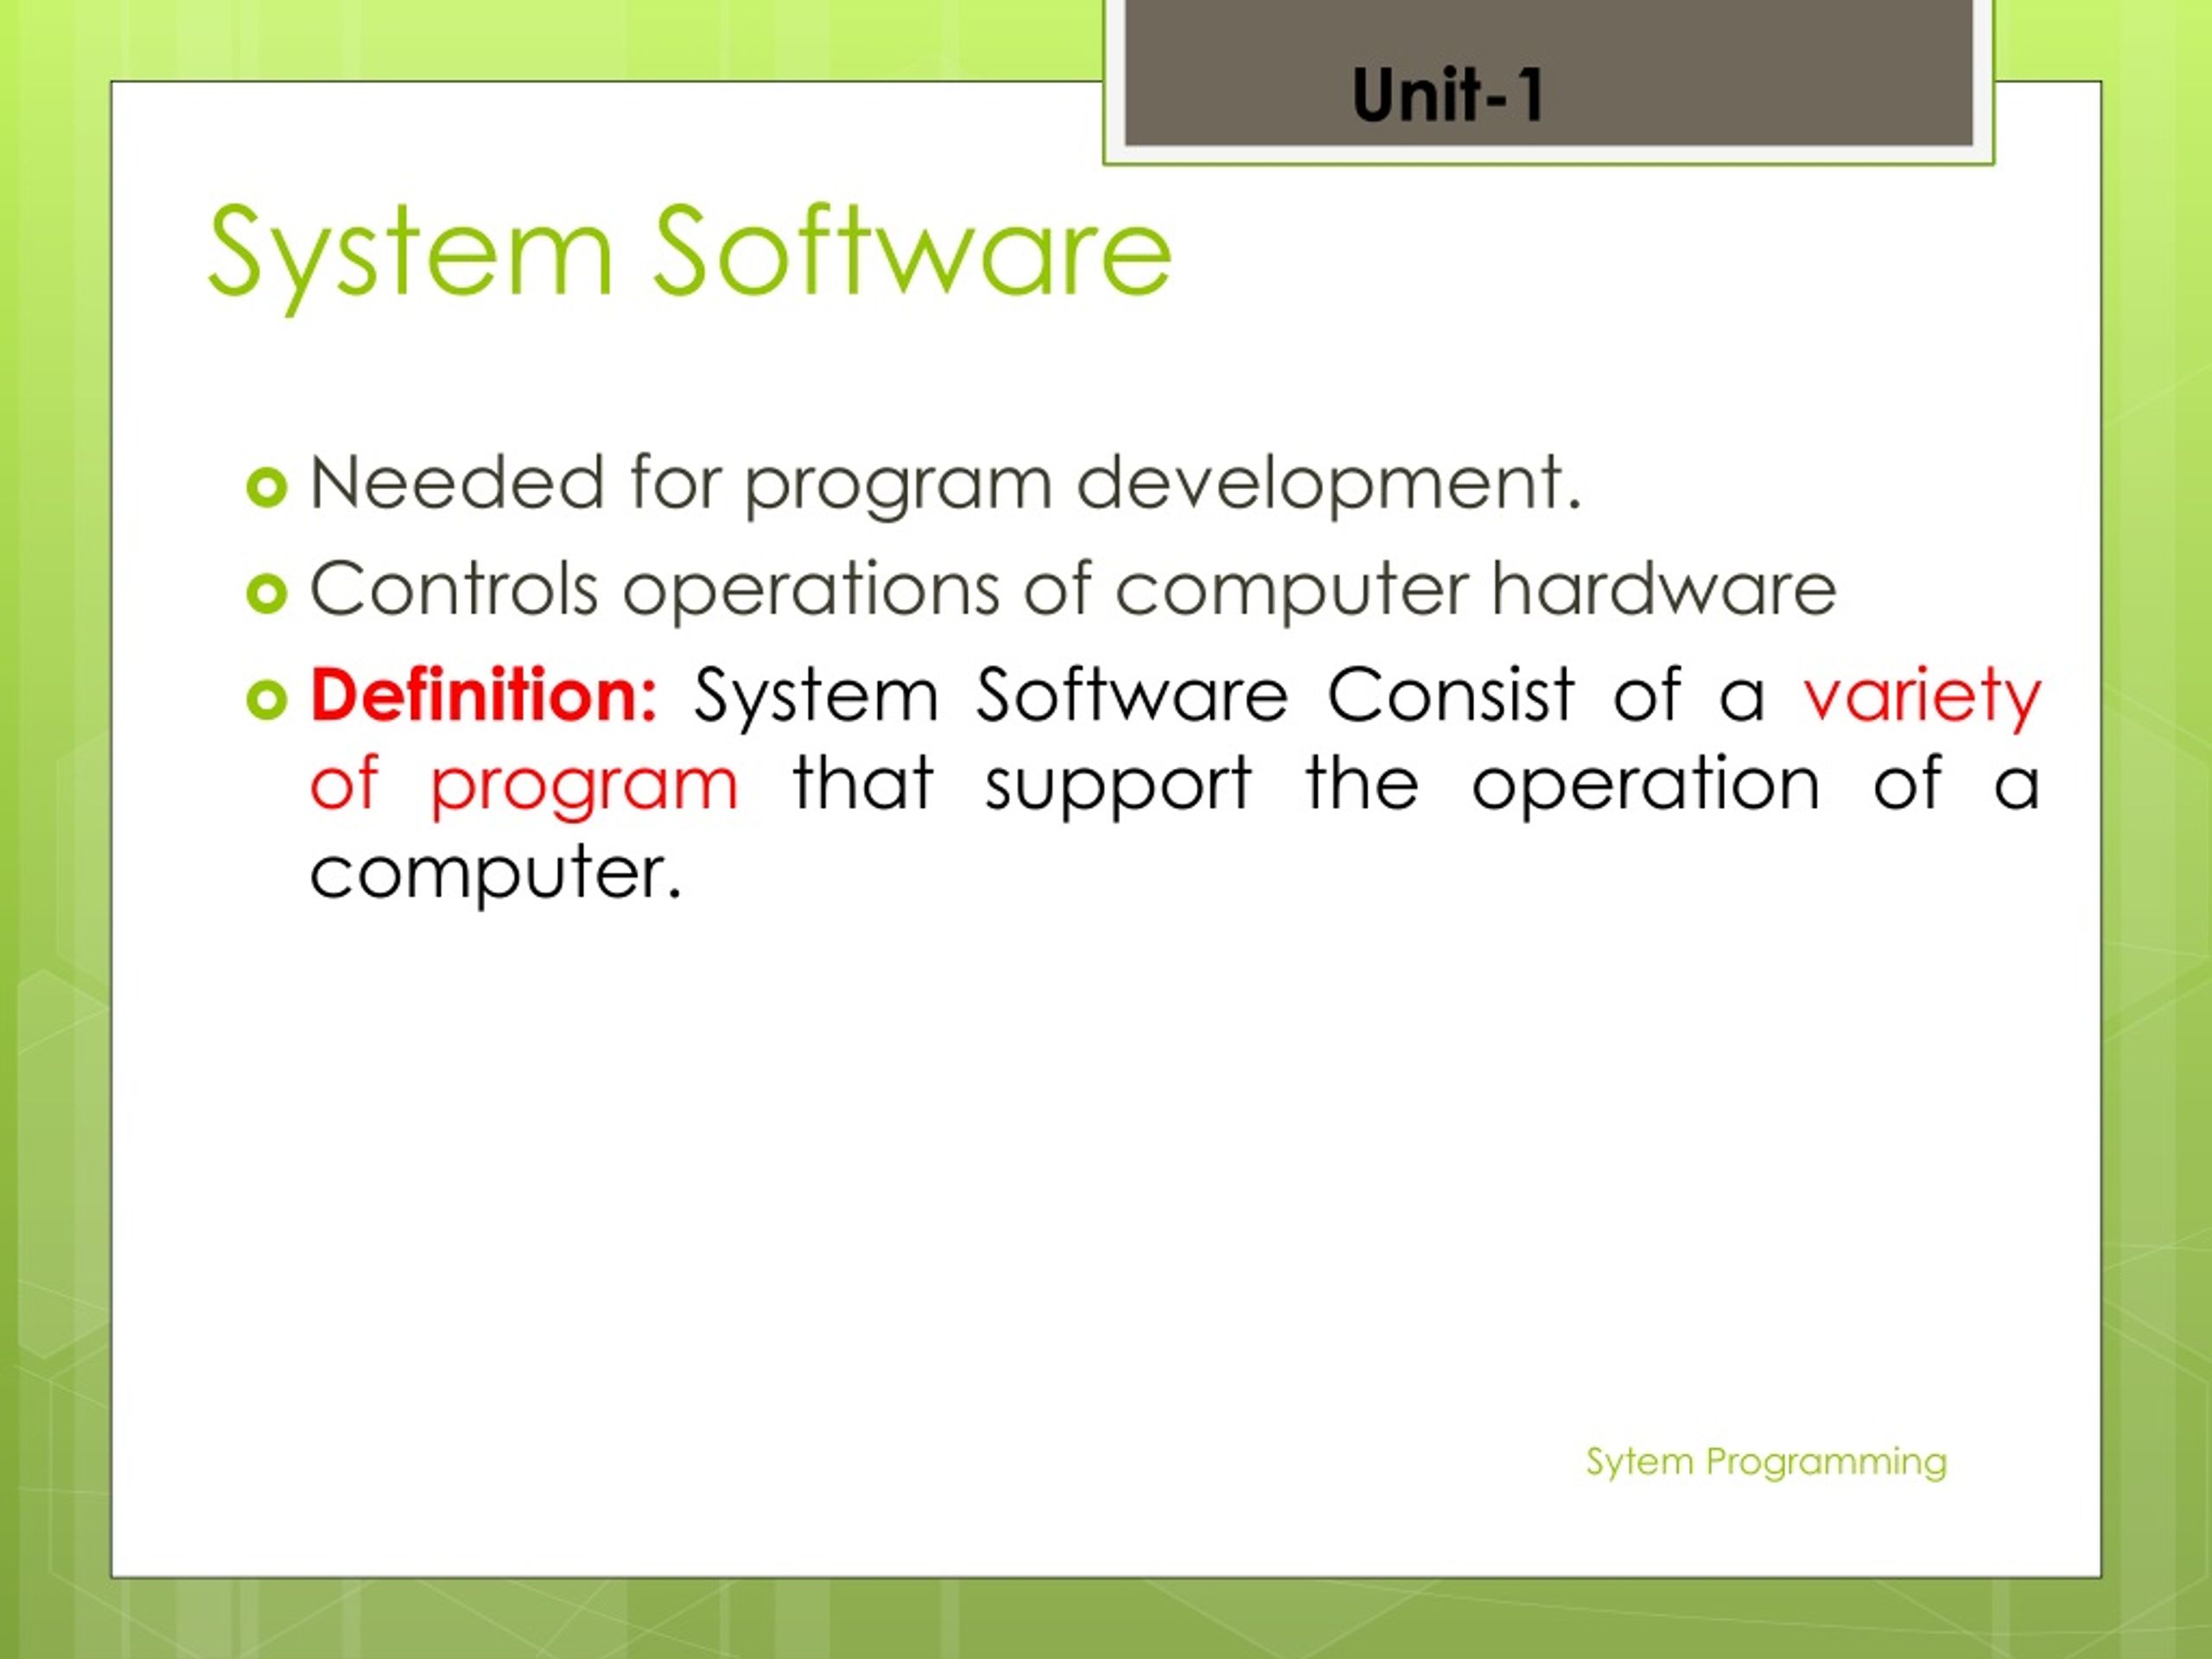 PPT - UNIT-1 Introduction to System Programming PowerPoint Presentation ...